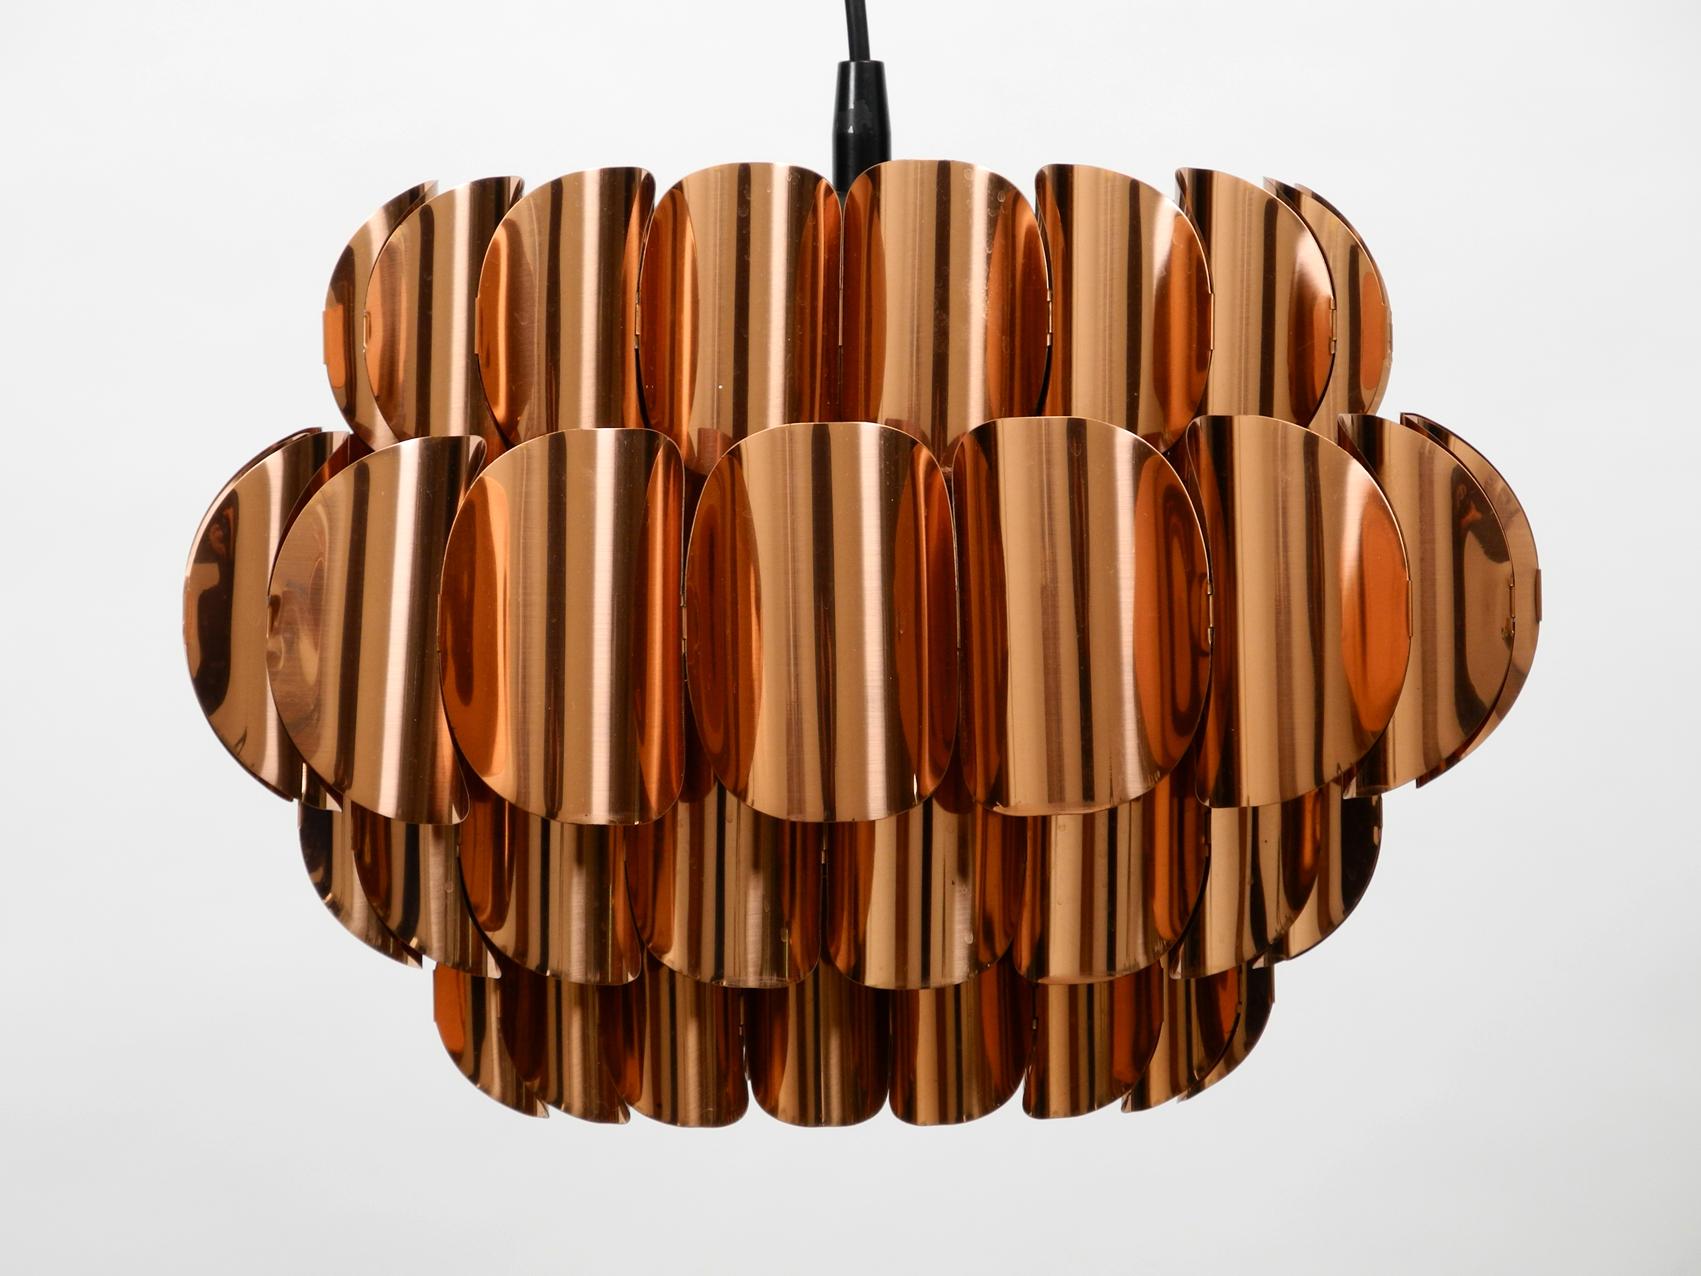 Very rare extraordinary large 1970s original lamella pendant lamp made of copper.
Made in Switzerland. High quality and elegant design.
Lampshade consists of 4 individual rings of copper with different diameters.
One E27 socket. Rewired due to